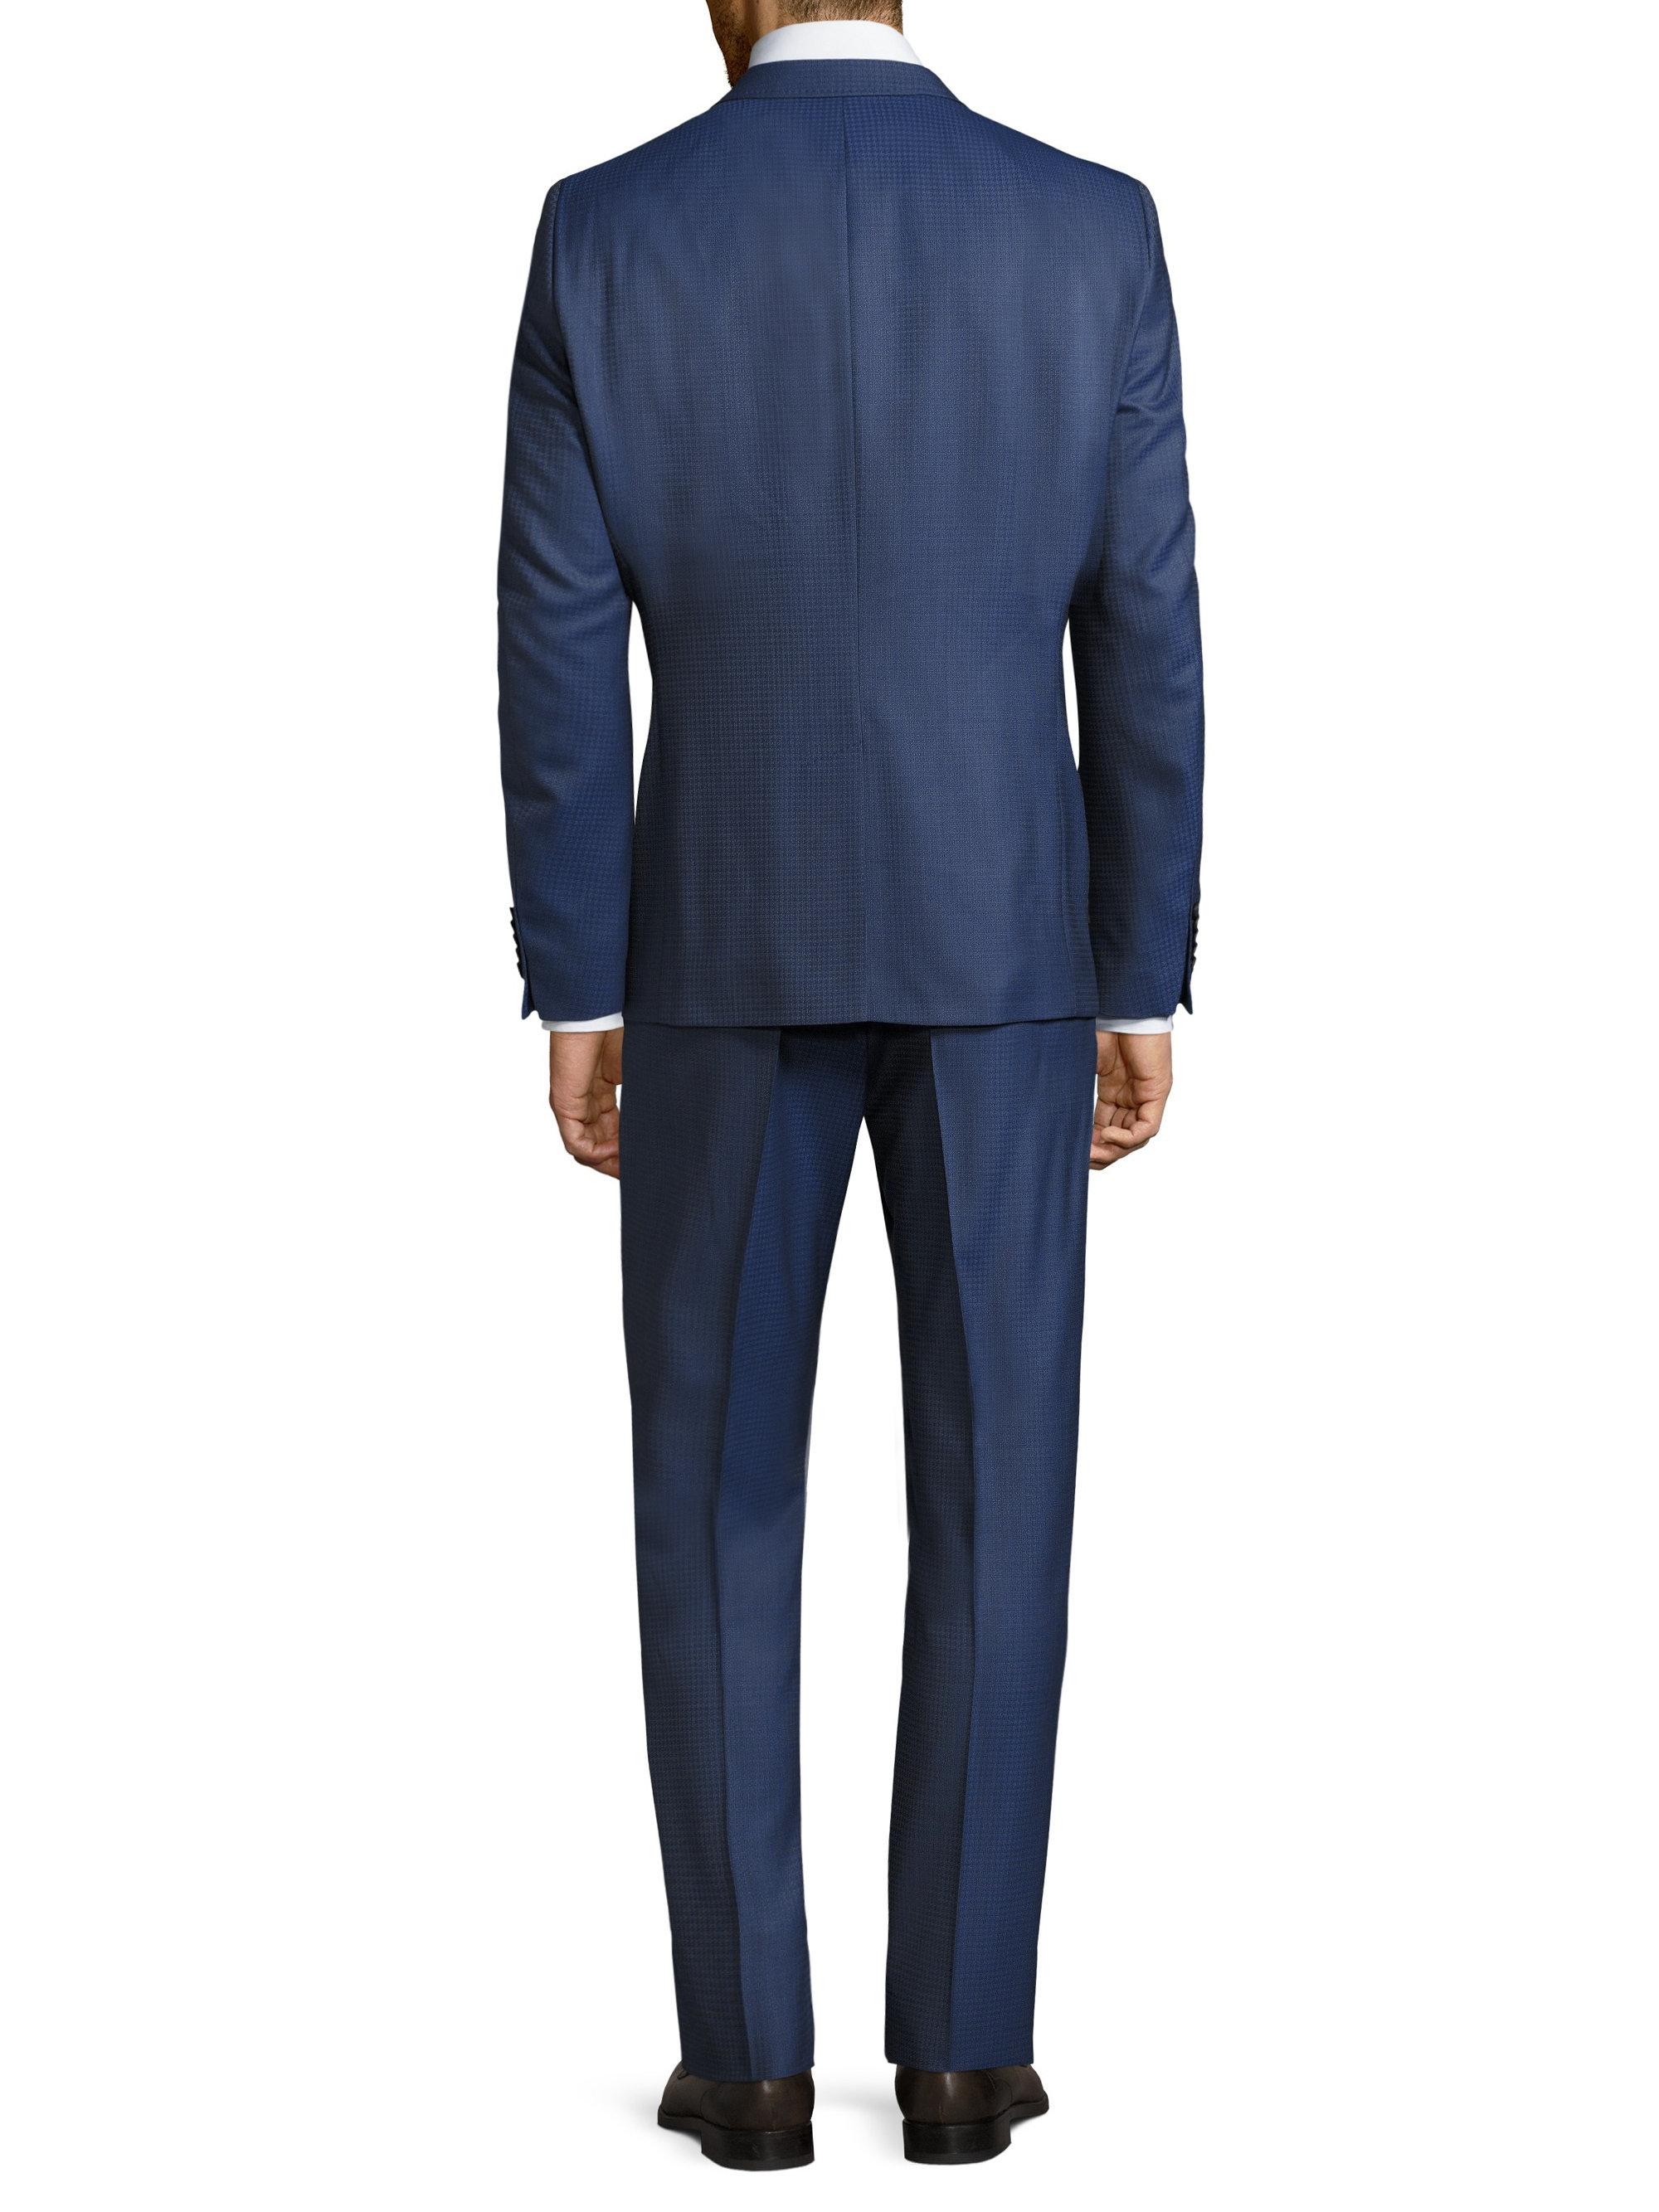 Lyst - Strellson Houndstooth Two-button Suit in Blue for Men